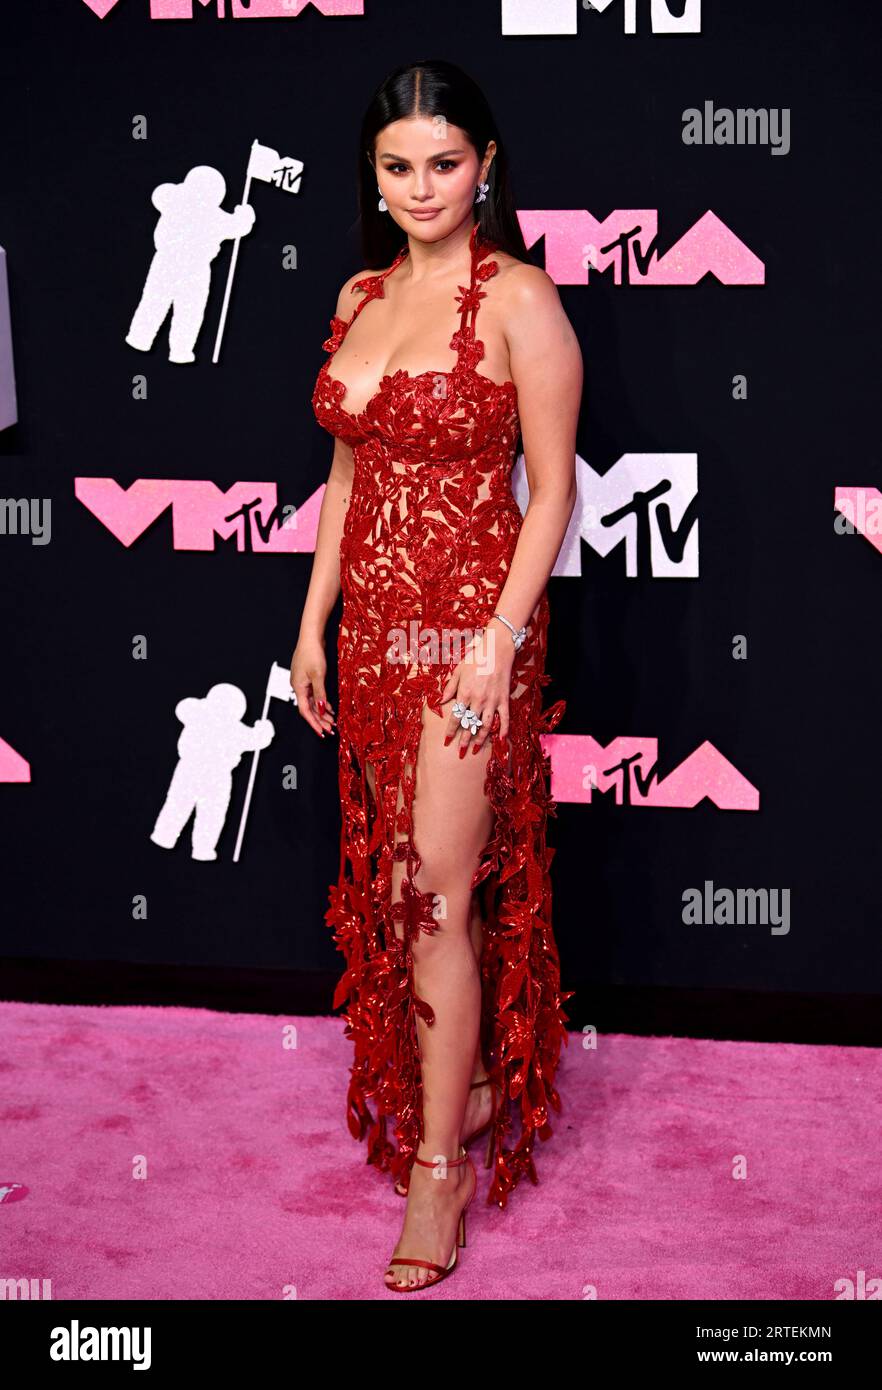 Selena Gomez attending the MTV Video Music Awards 2023 held at the Prudential Center in Newark, New Jersey. Picture date: Tuesday September 12, 2023. Stock Photo